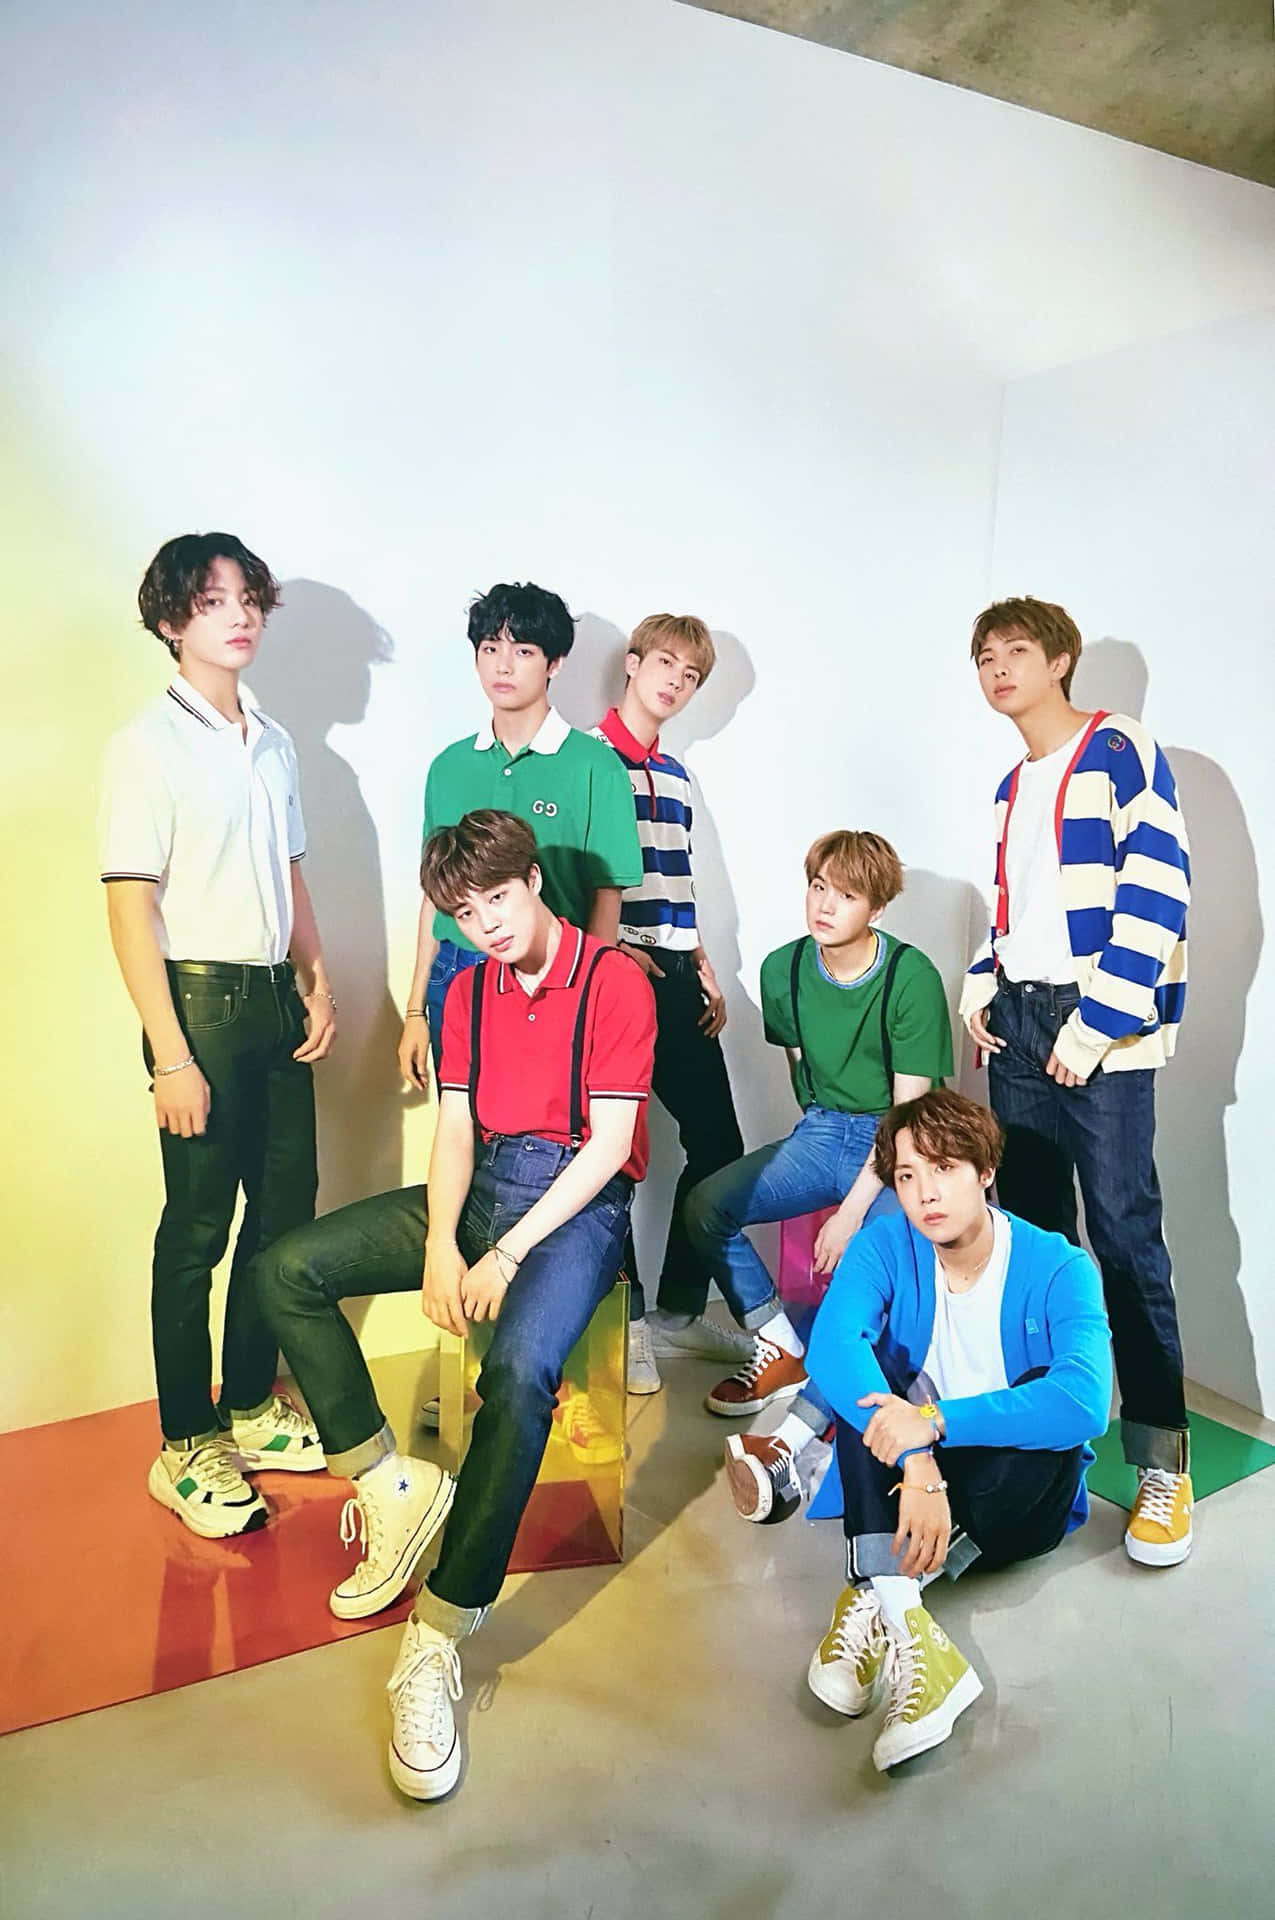 BTS Photoshoot In Casual Outfits Wallpaper